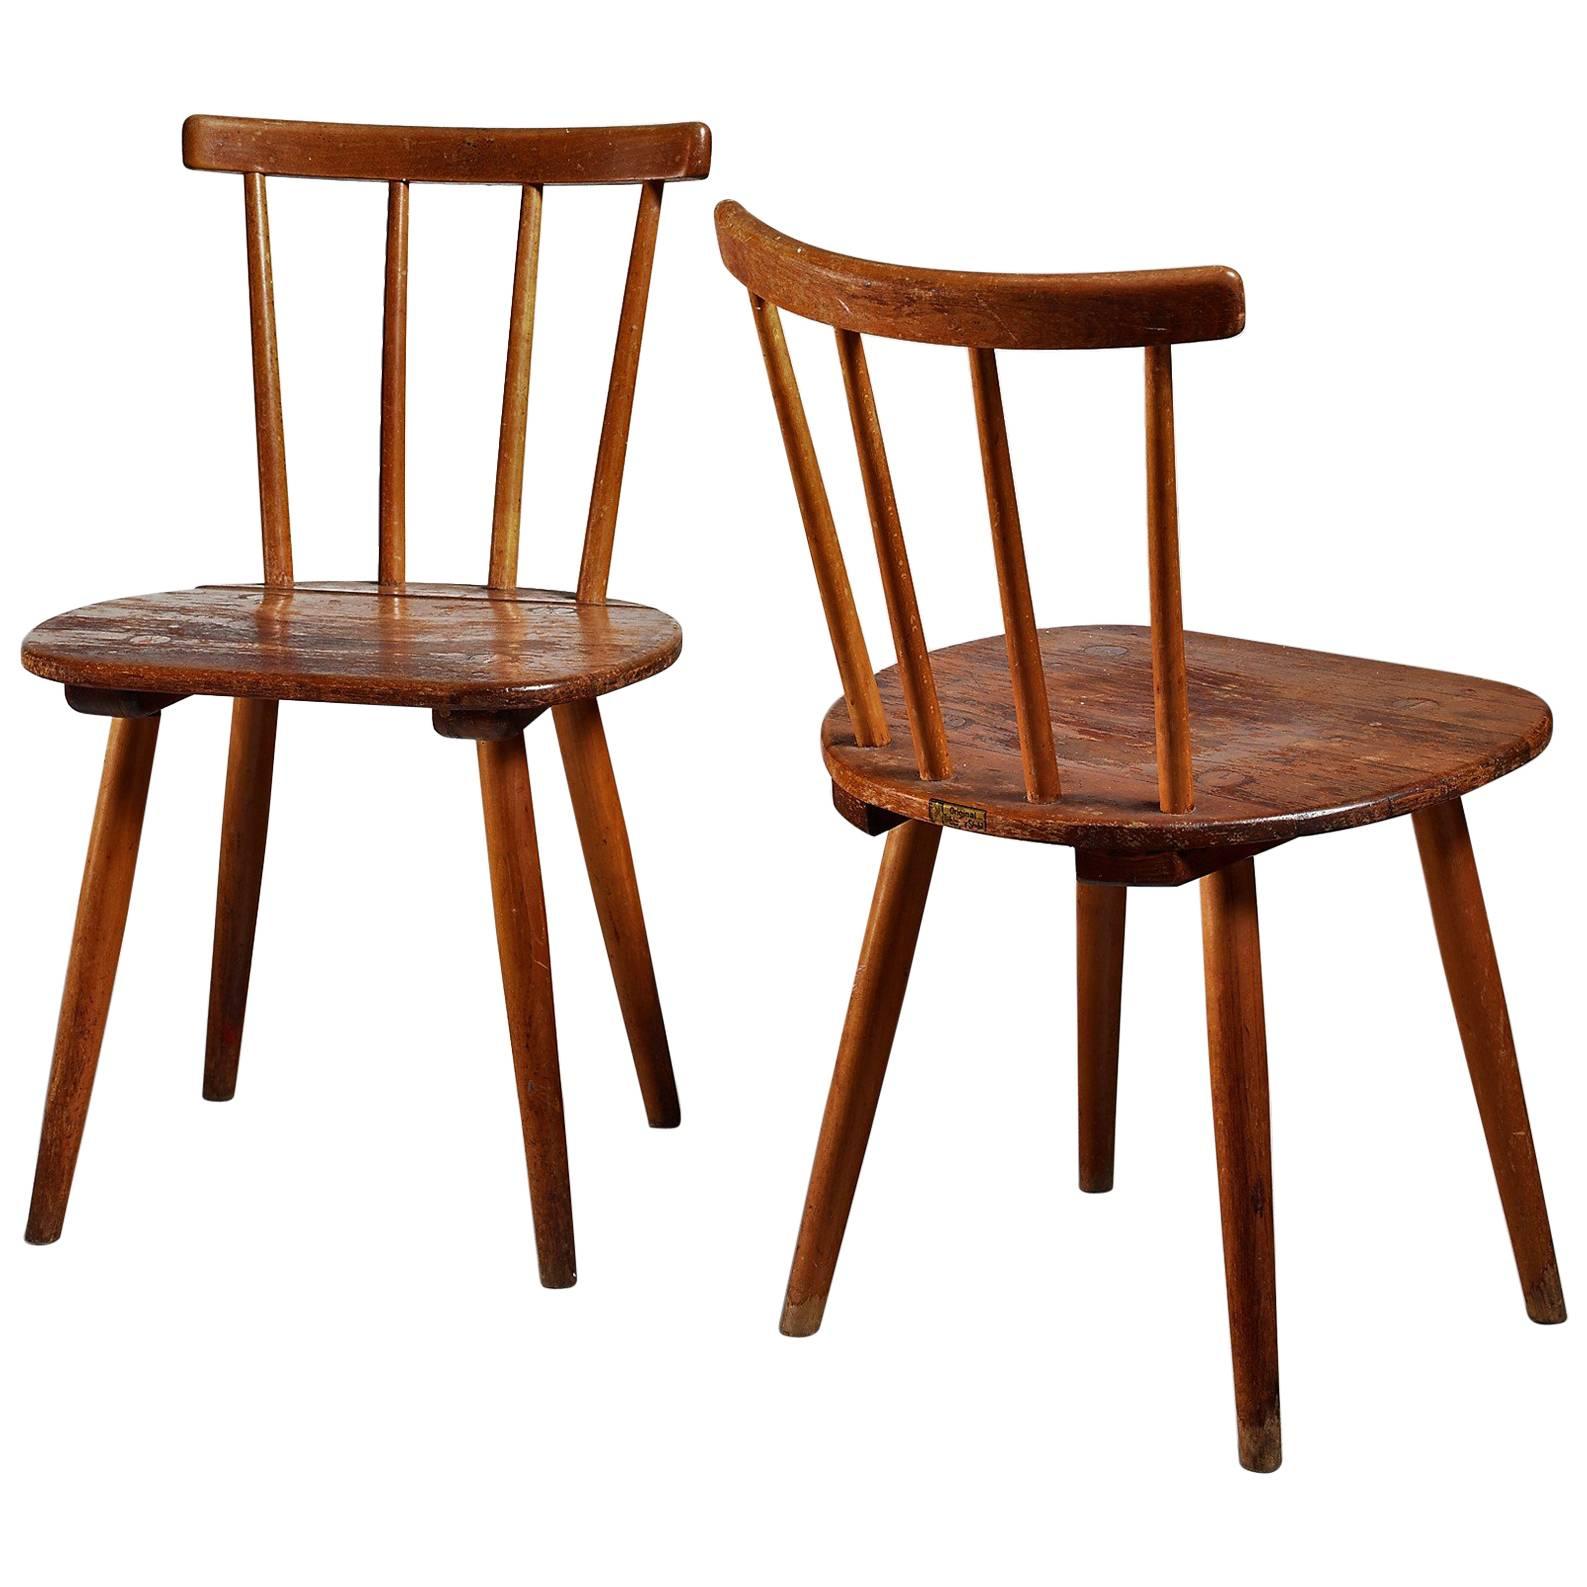 Pair of Tubinger Chairs by Adolf G. Schneck, Germany, 1930s For Sale